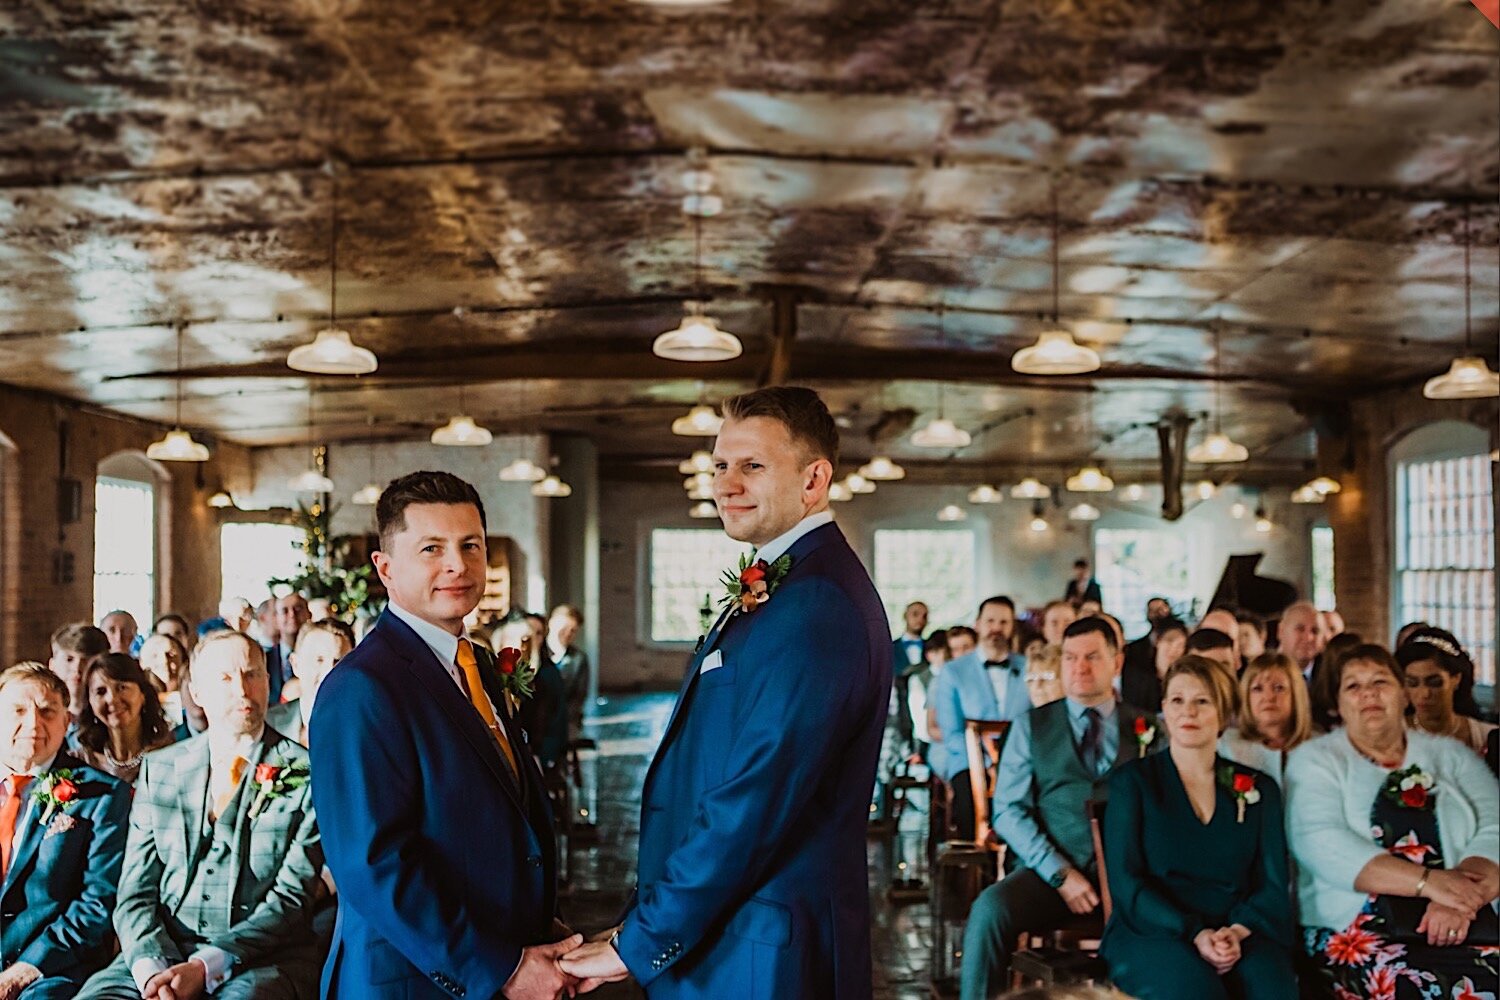 43_TWS-396 copy_photographer_wedding_industrial_venue_gay_grooms_photography_ceremony_chic_westmill_rings_derby.jpg